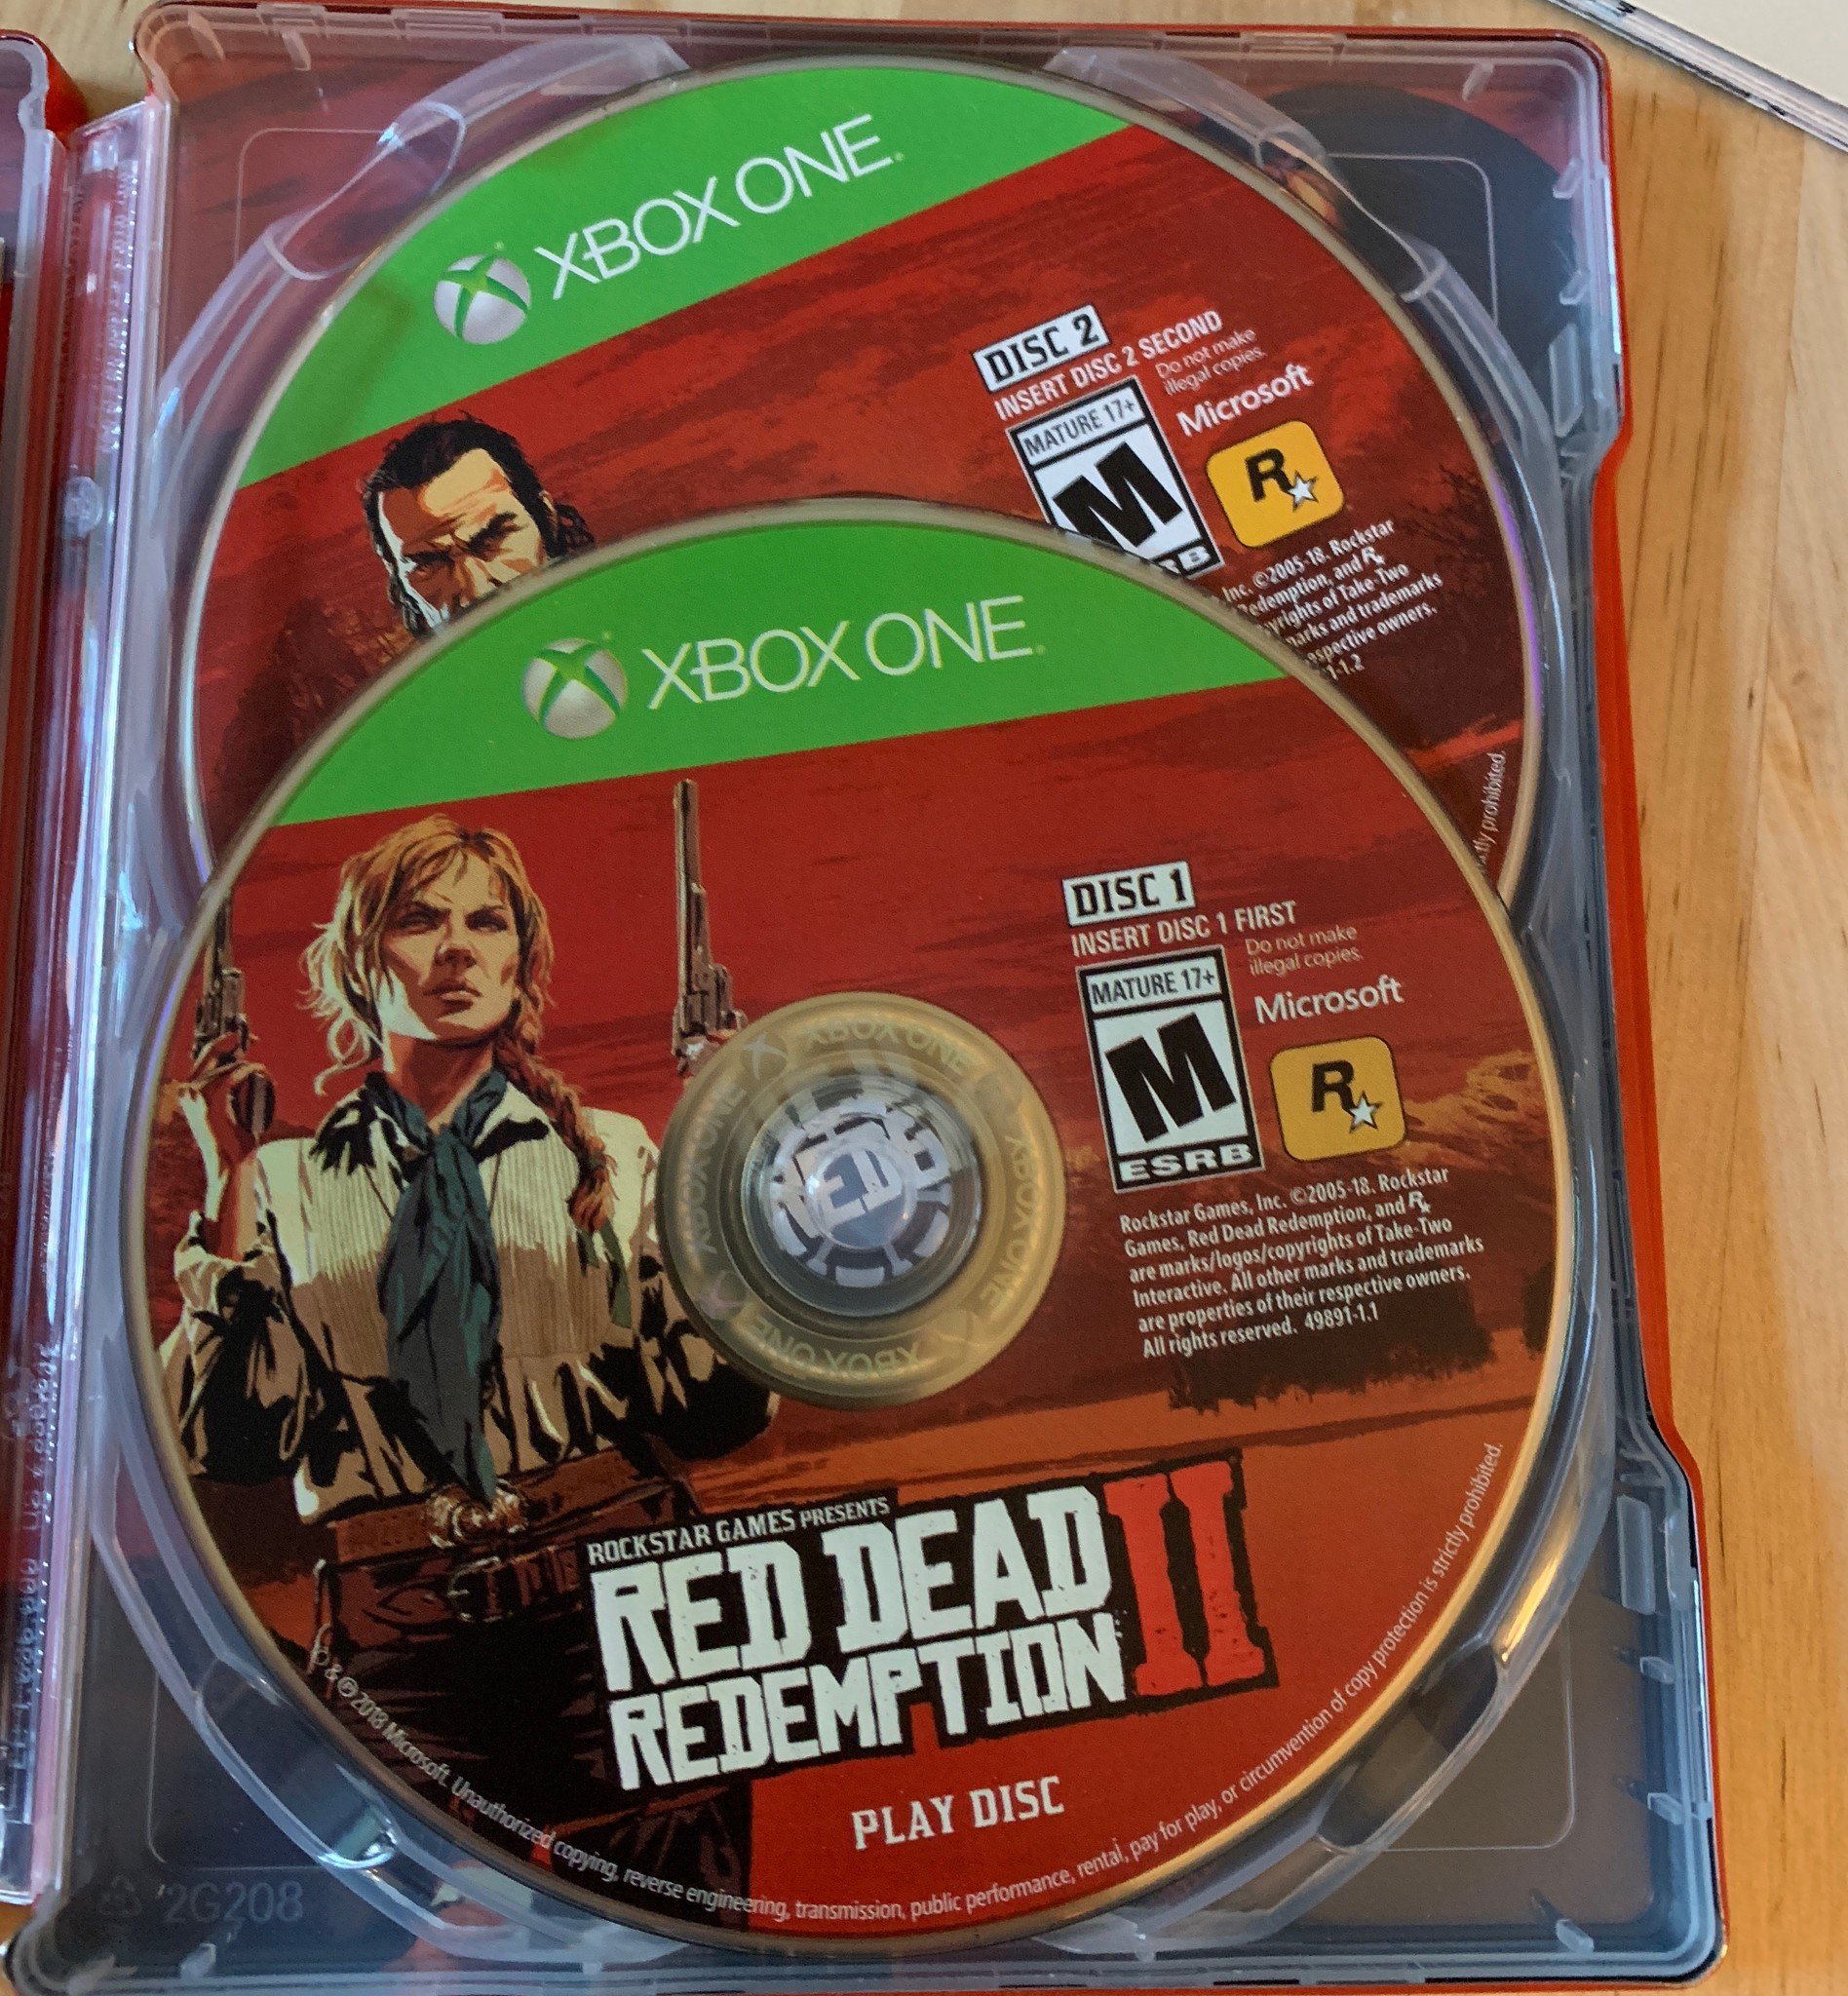 Red Redemption 2 ships on multiple discs for Xbox One | Windows Central